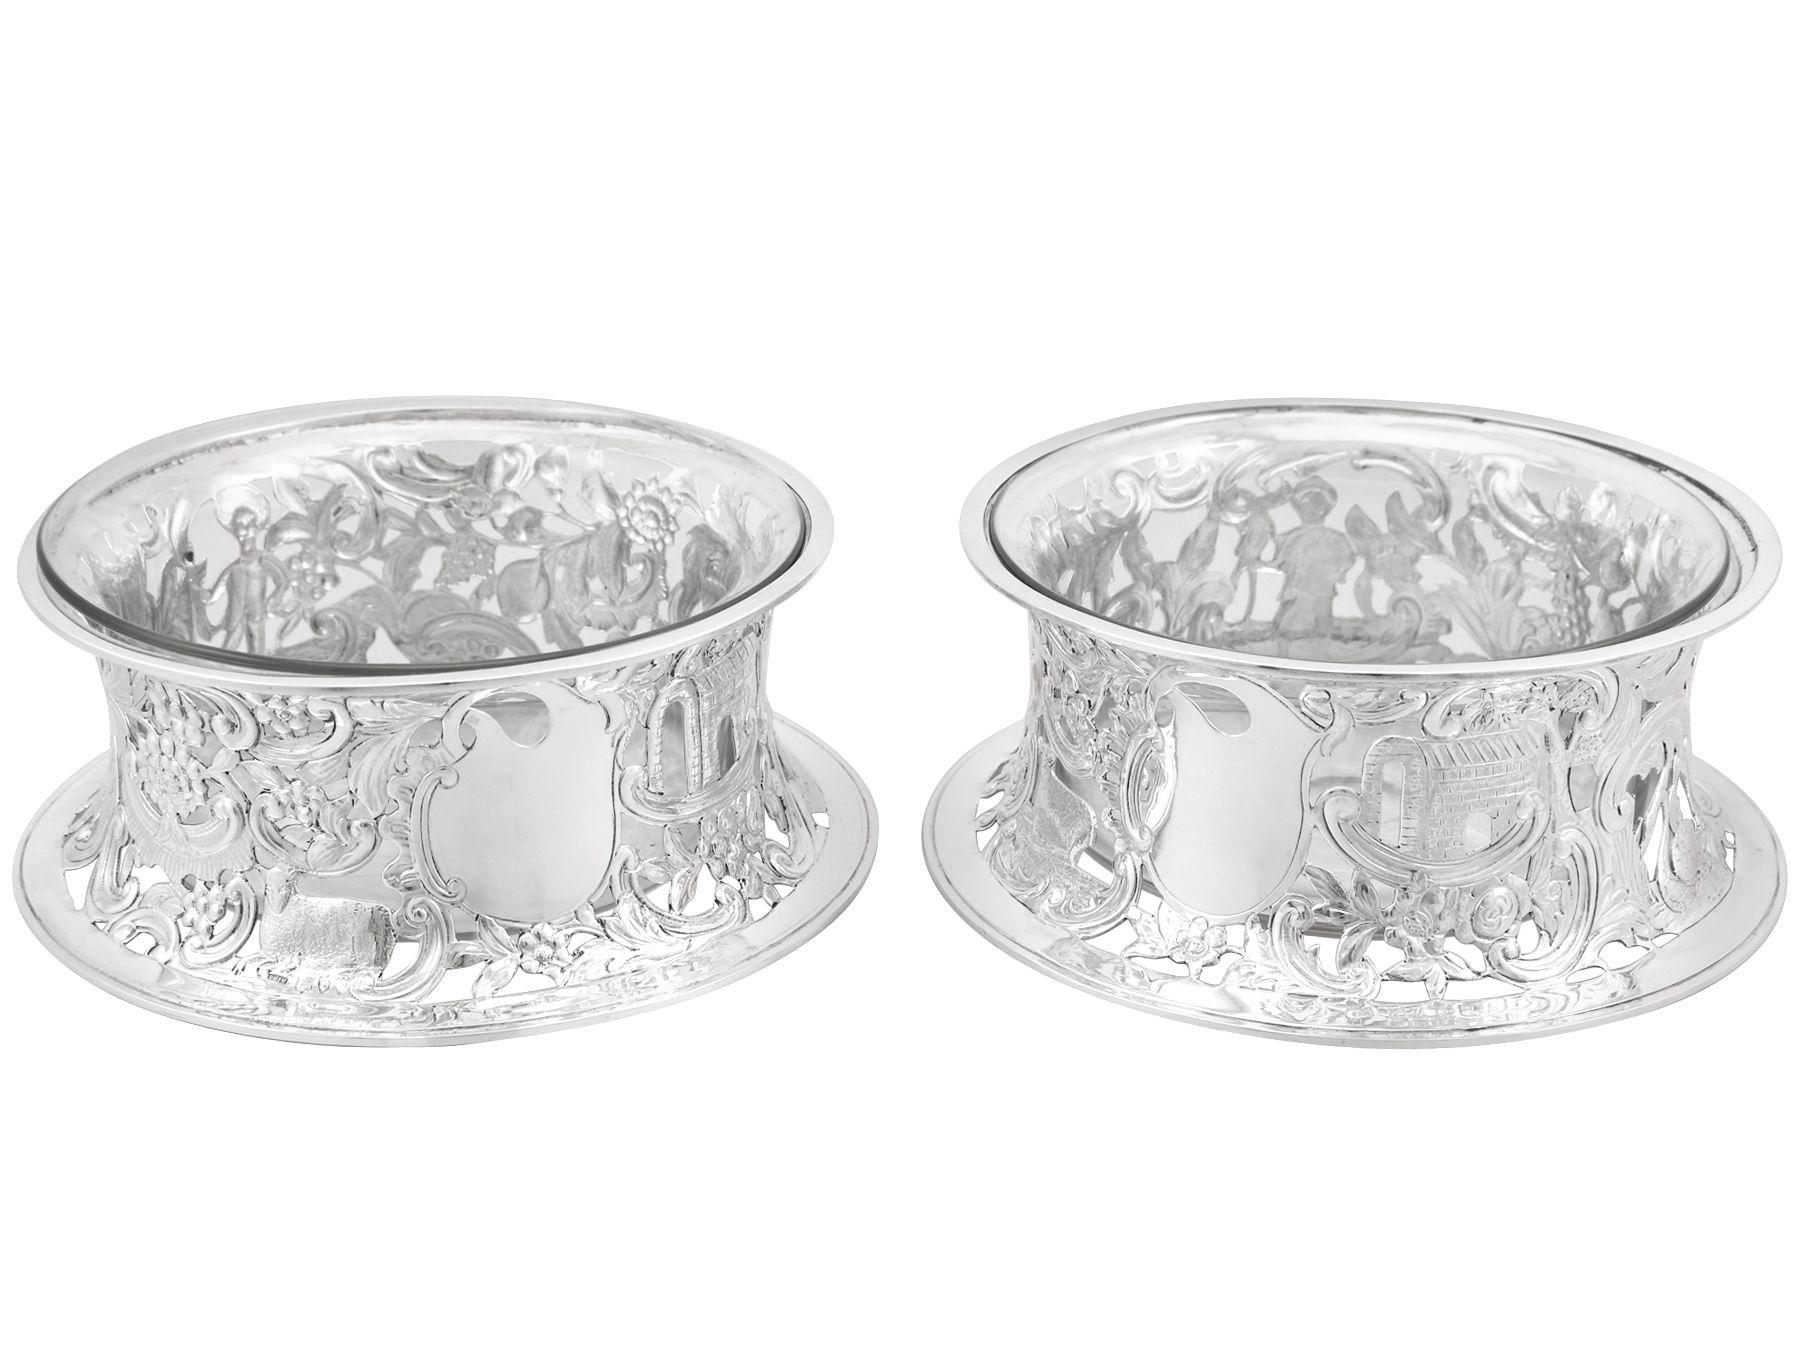 An exceptional, fine and impressive pair of antique Victorian English sterling silver potato dish rings; an addition to our ornamental silverware collection.

These exceptional antique Victorian sterling silver dish rings have a circular waisted